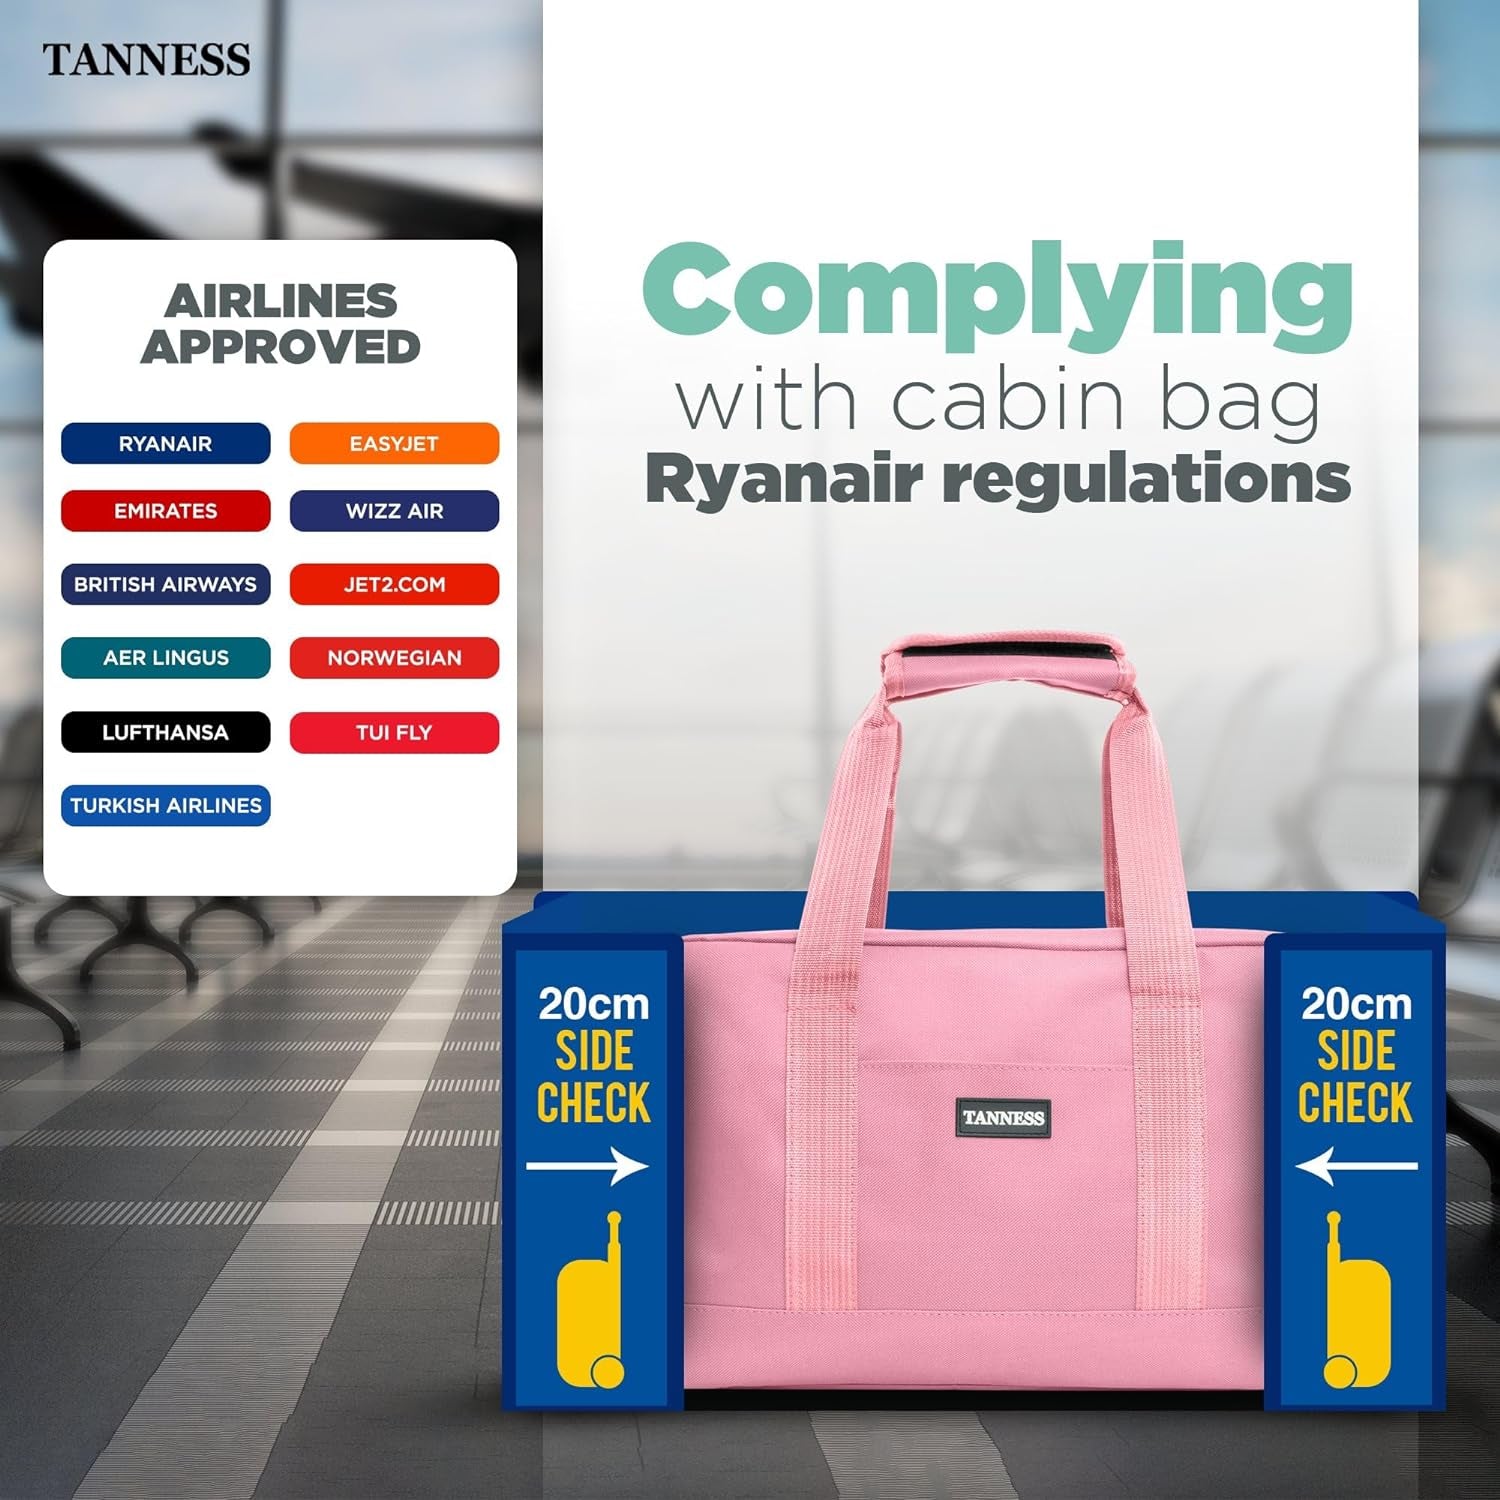 40X20X25 Cabin Bag, Ryanair Cabin Bags 40X20X25|Ryanair Cabin Bags, Cabin Bag, Ryanair Cabin Bags 40X20X25 Underseat|Weekend Bag, Carry on Bag, Travel Bag for All Occasions Men & Women